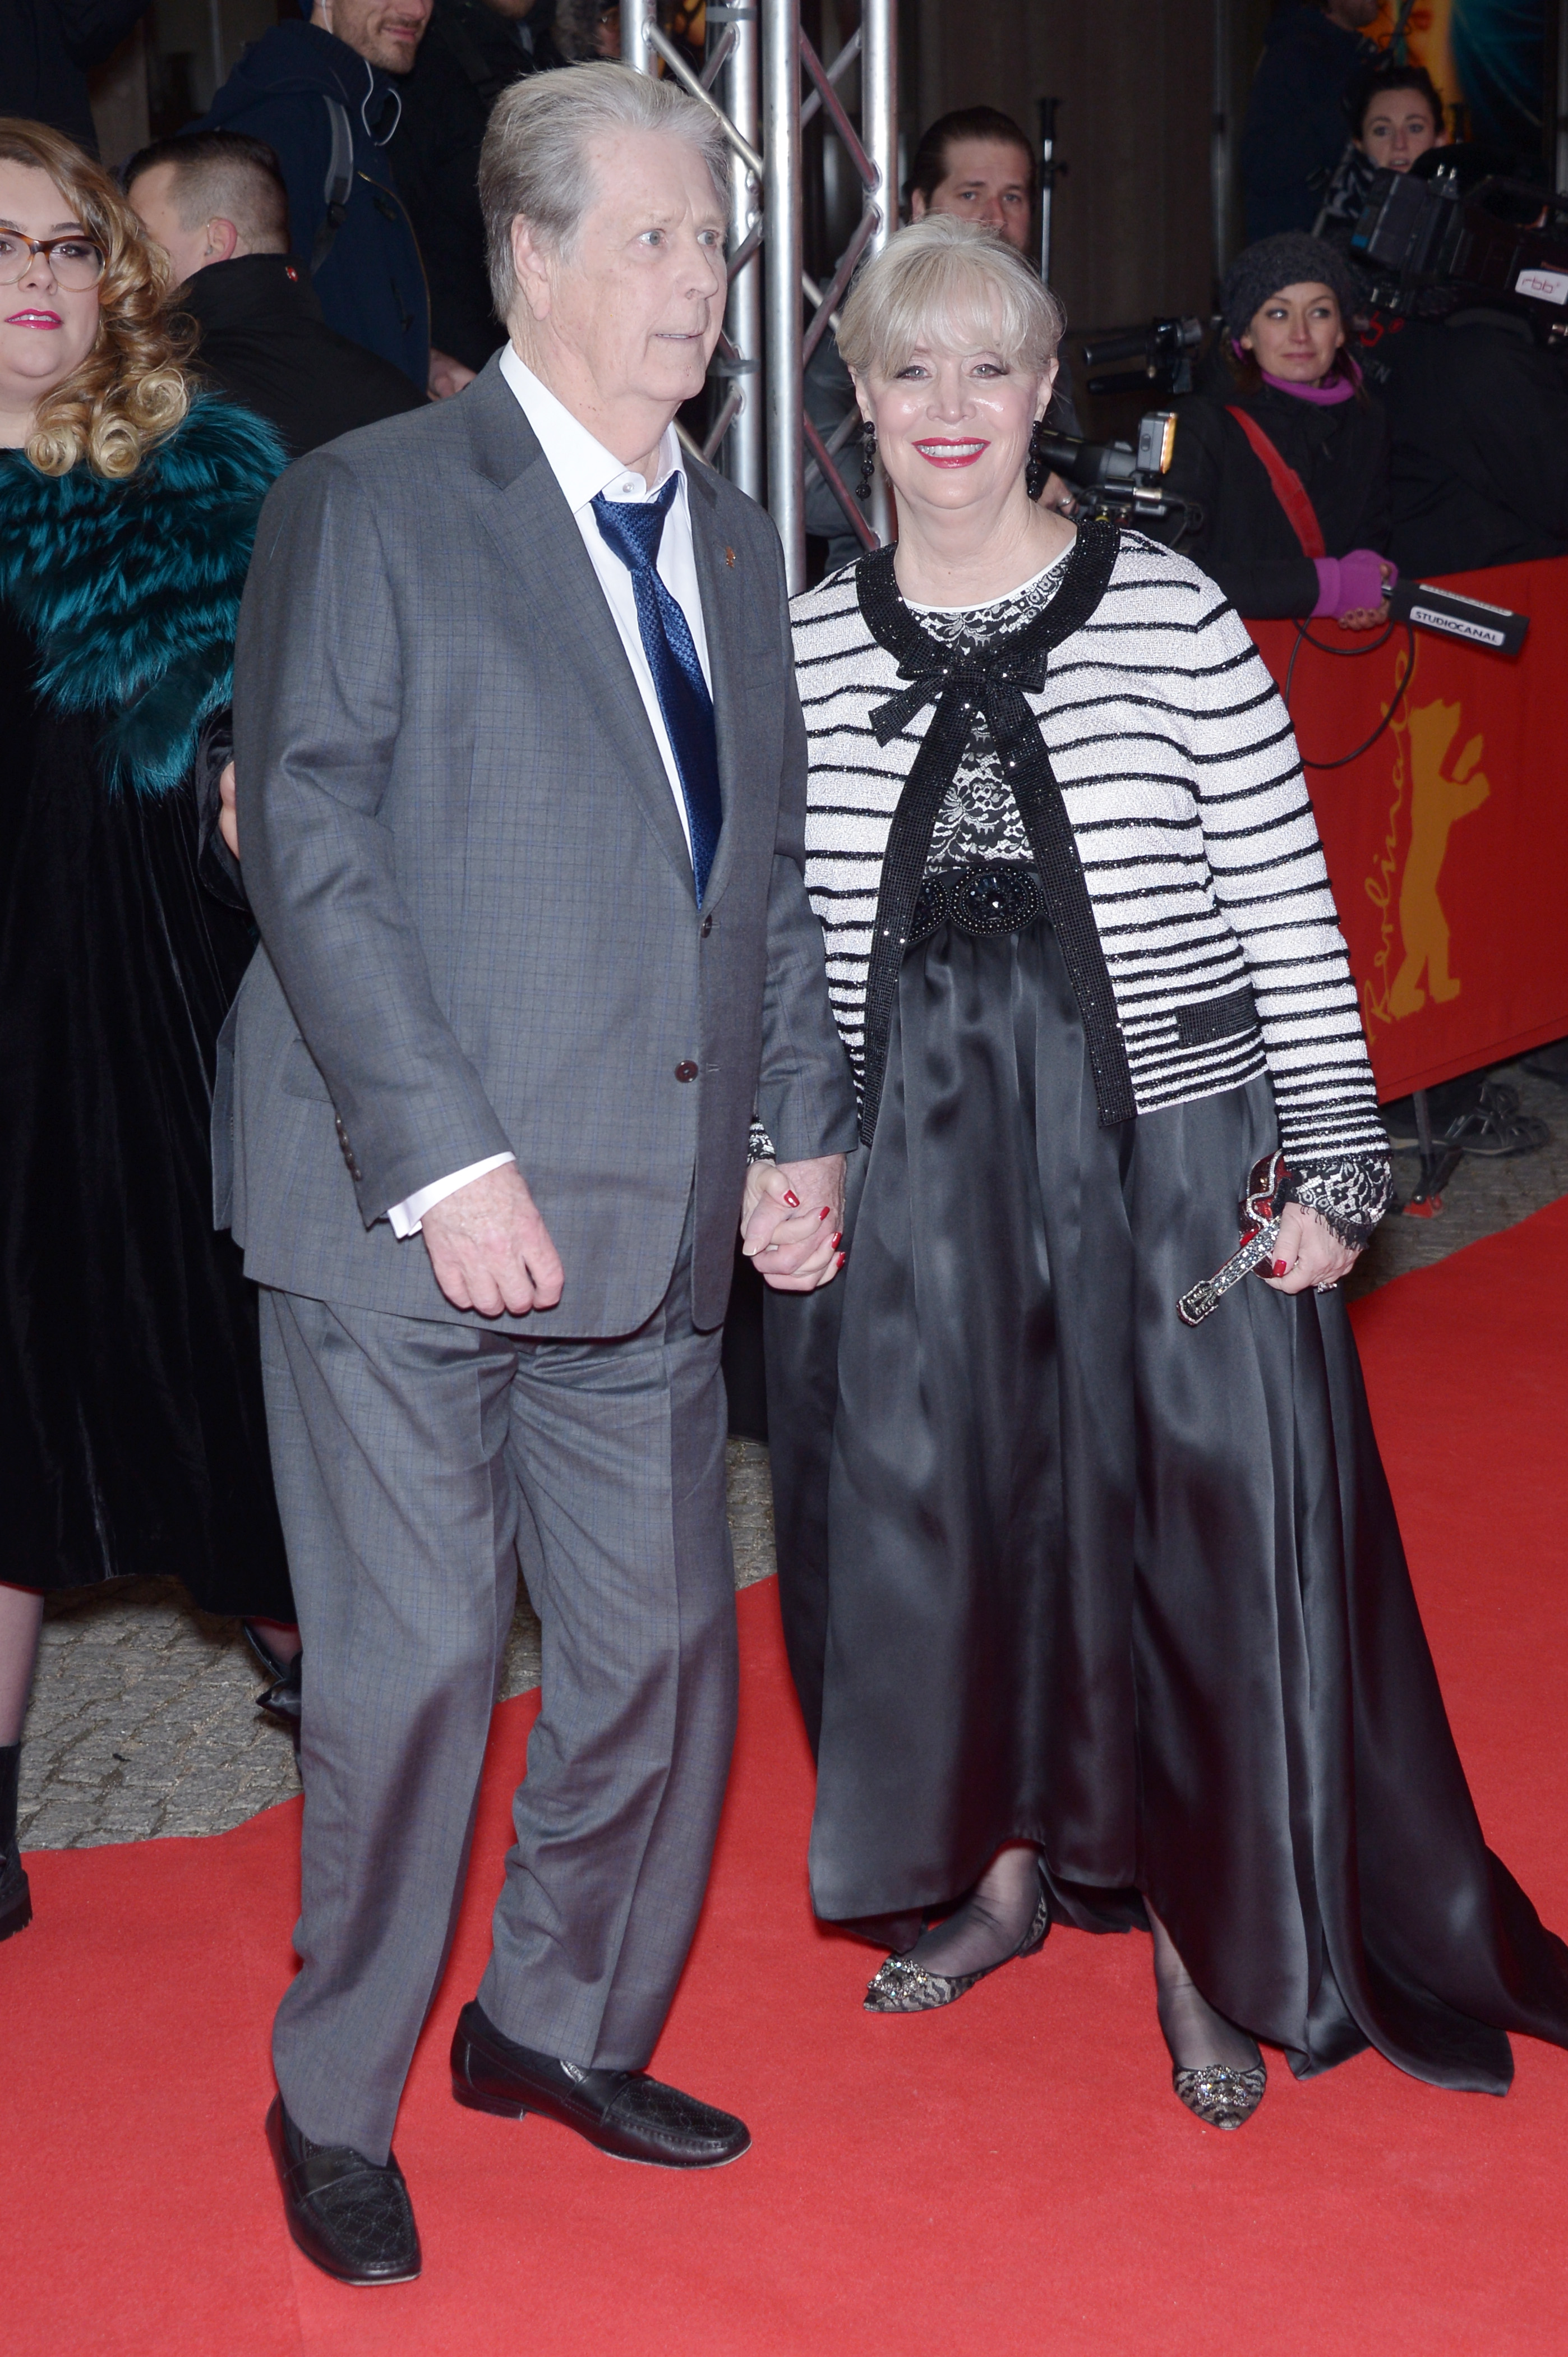 Brian Wilson and Melinda Ledbetter at the 65th Berlinale International Film Festival on February 8, 2015, in Berlin, Germany. | Source: Getty Images